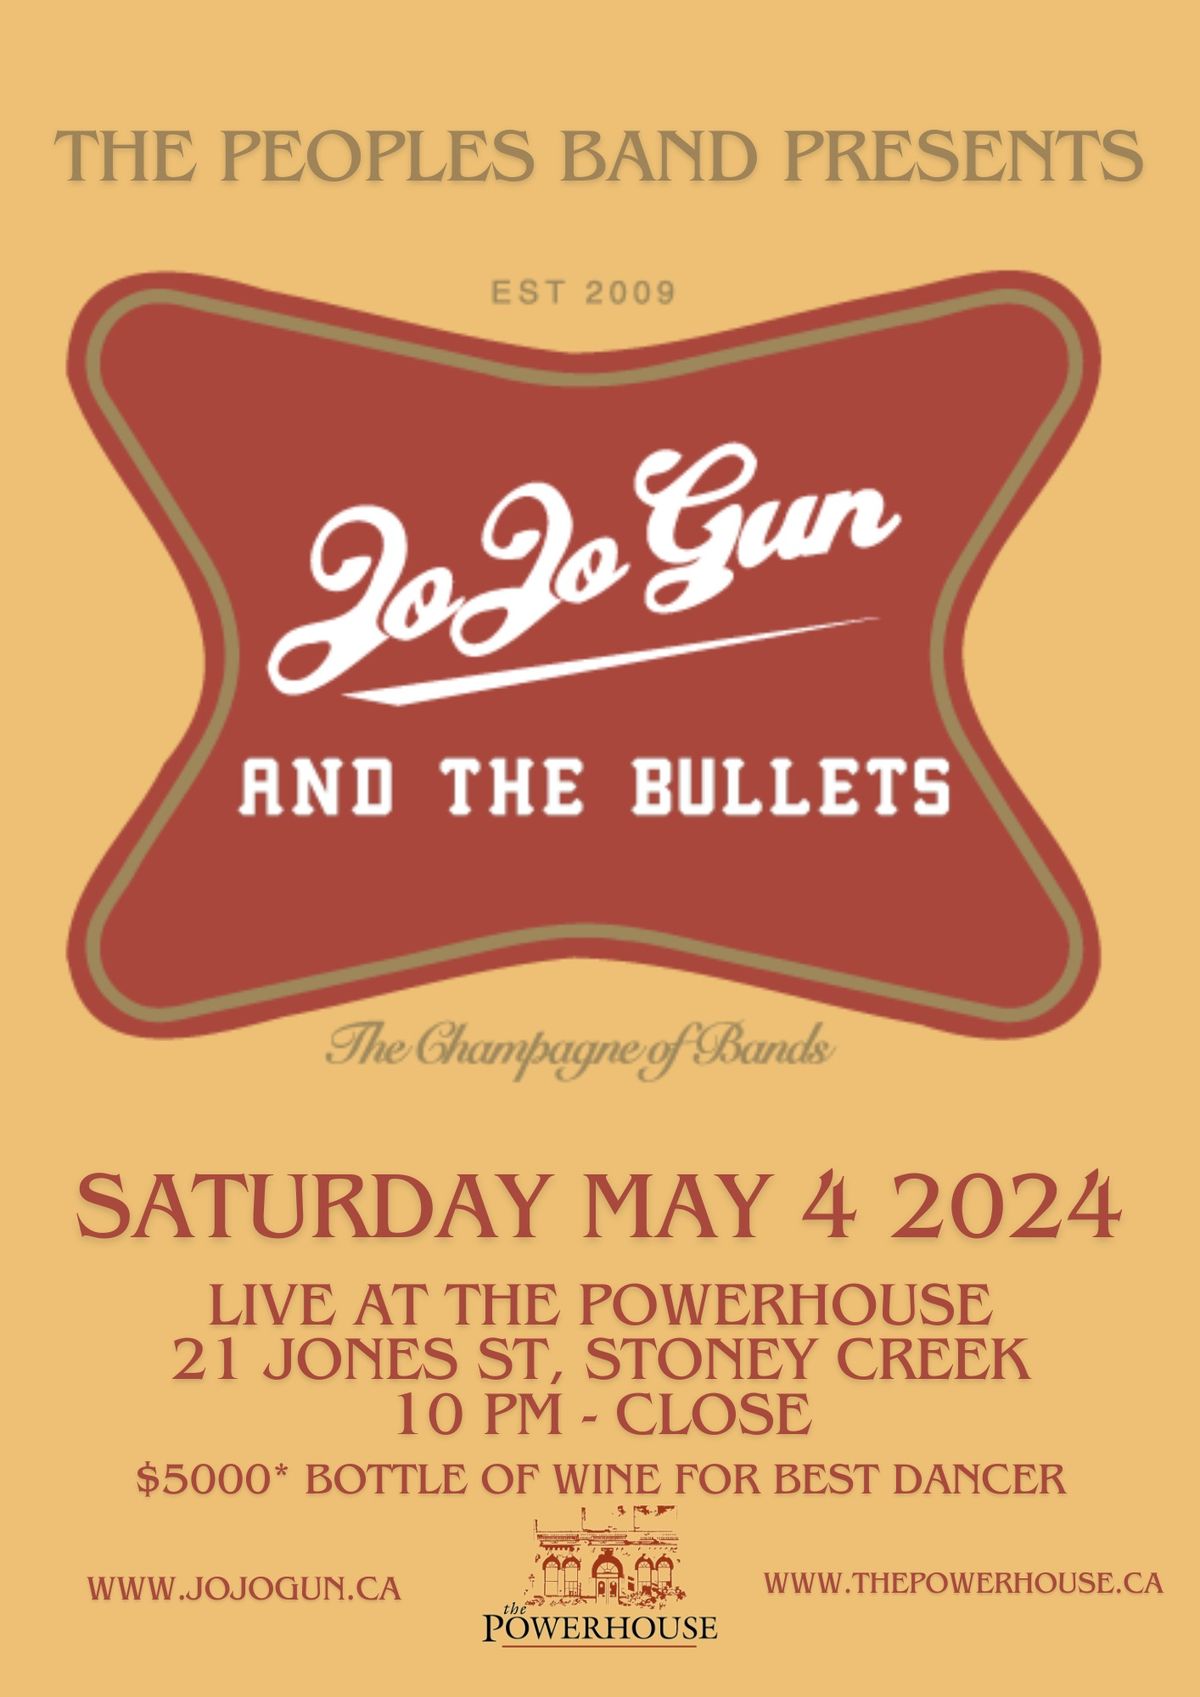 THE PEOPLES BAND PRESENTS: JOJO GUN AND THE BULLETS SPRING BASH